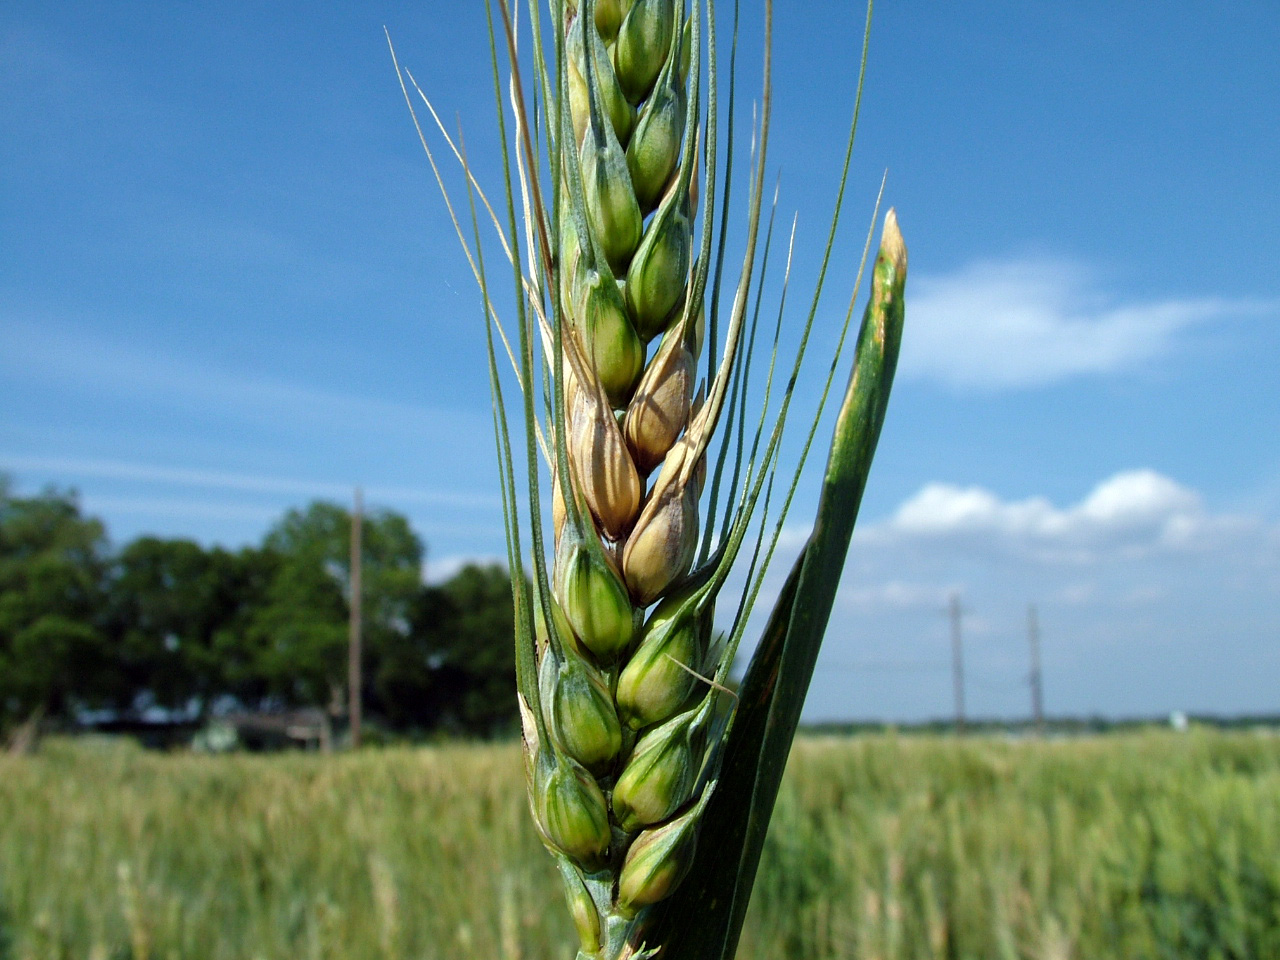 Fusarium damage on a wheat head. Details in text following the image.